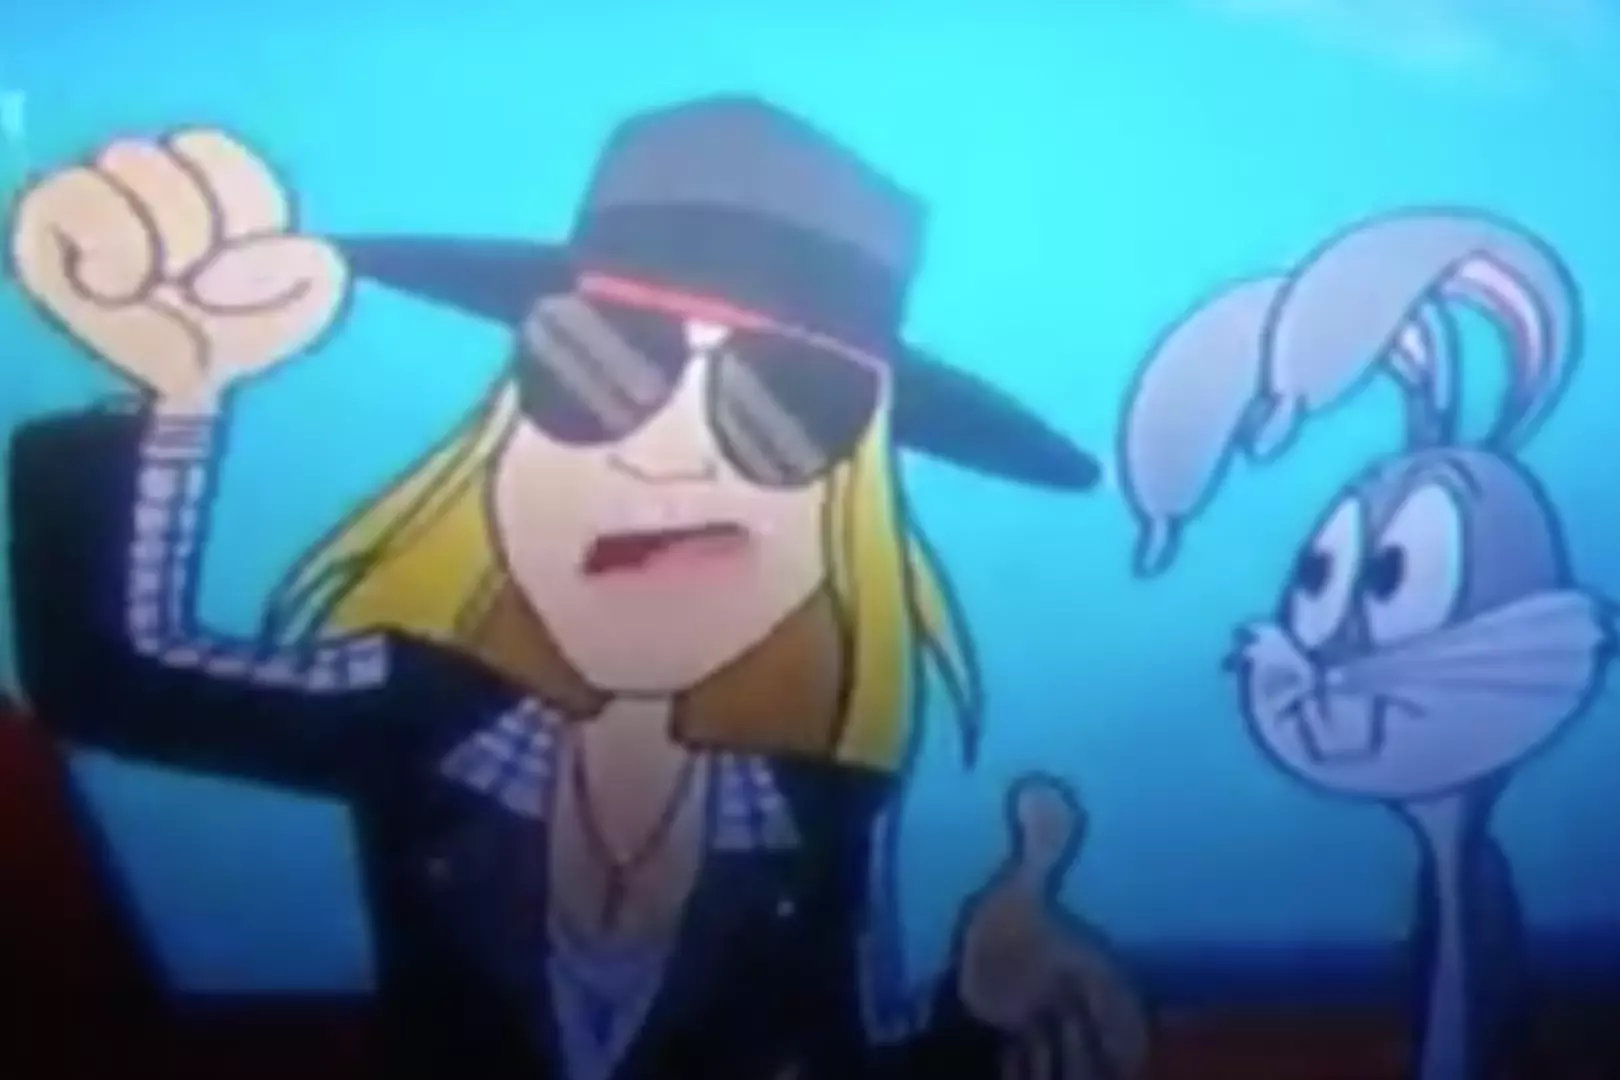 Bonkers Cartoon Porn - Did Axl Rose Debut a New Song on a 'Looney Tunes' Episode